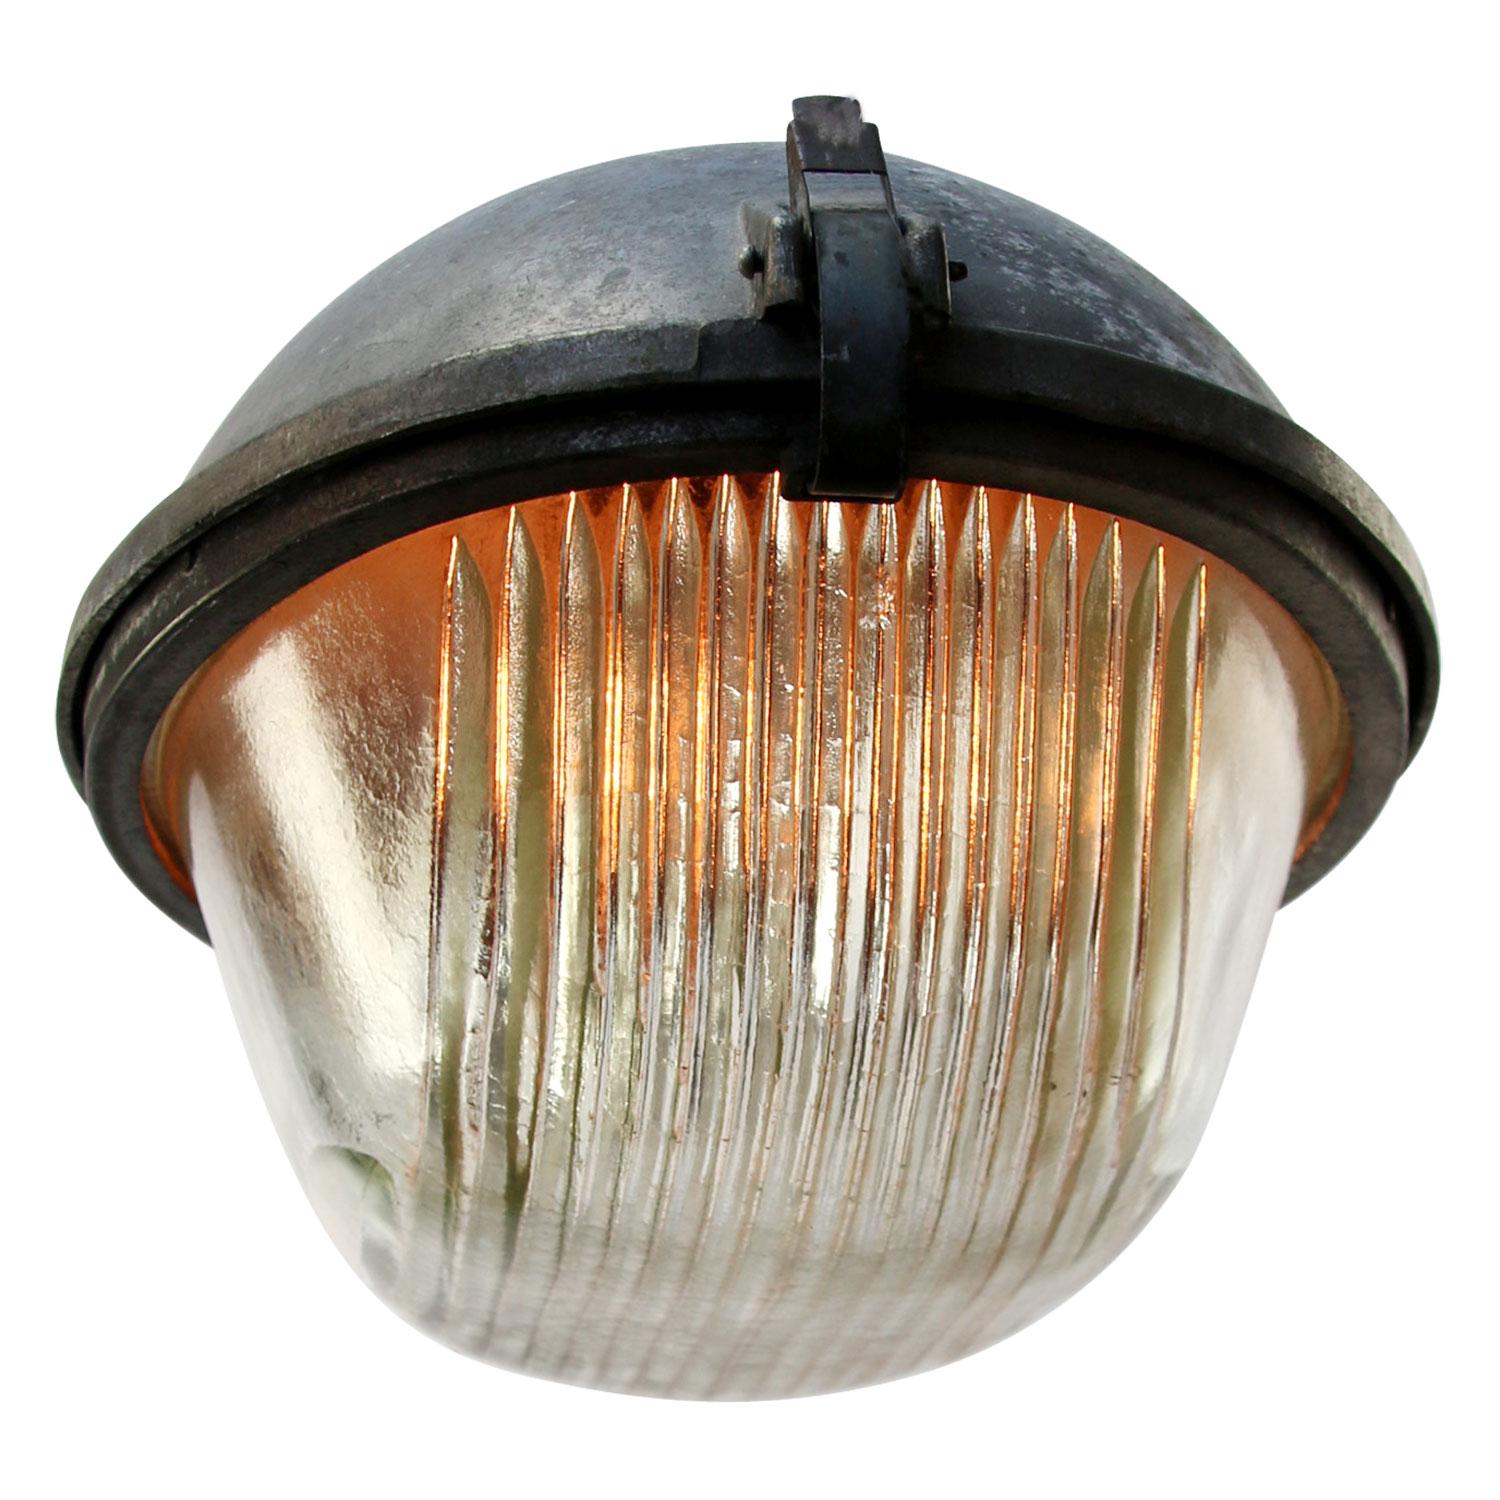 Large street wall light.
Aluminum body with round Holophane glass.

Weight 7.00 kg / 15.4 lb

Priced per individual item. All lamps have been made suitable by international standards for incandescent light bulbs, energy-efficient and LED bulbs.